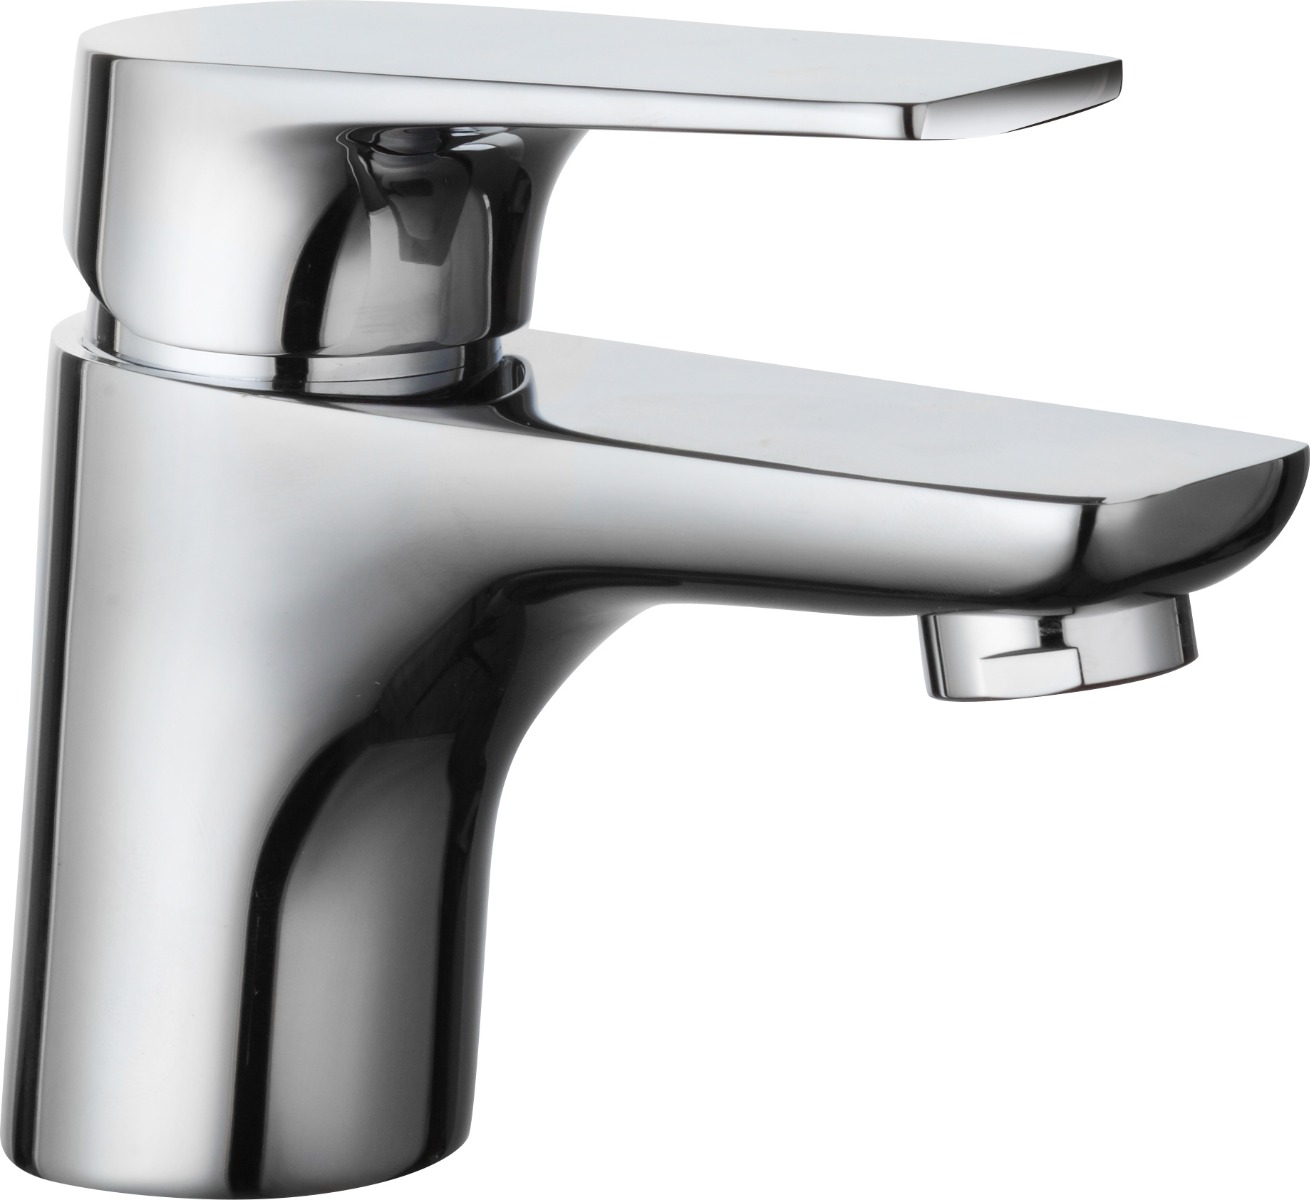 Flite mini single lever basin mixer without pop up waste